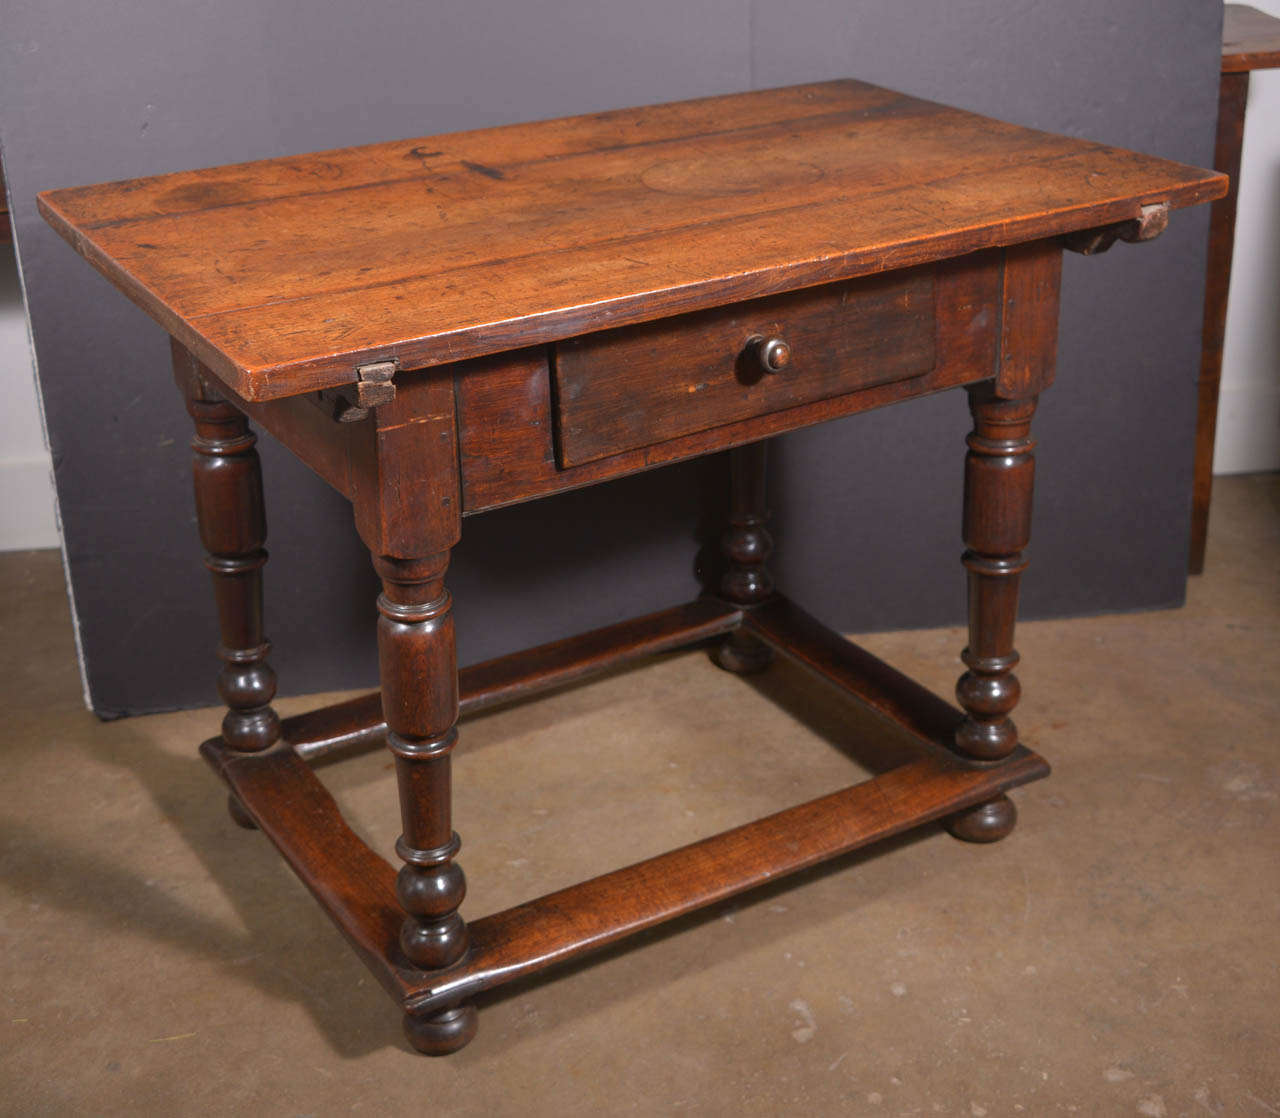 Beautiful Walnut table with a moveable top used to store rents.  Wonderful stretcher connecting all four legs at base.